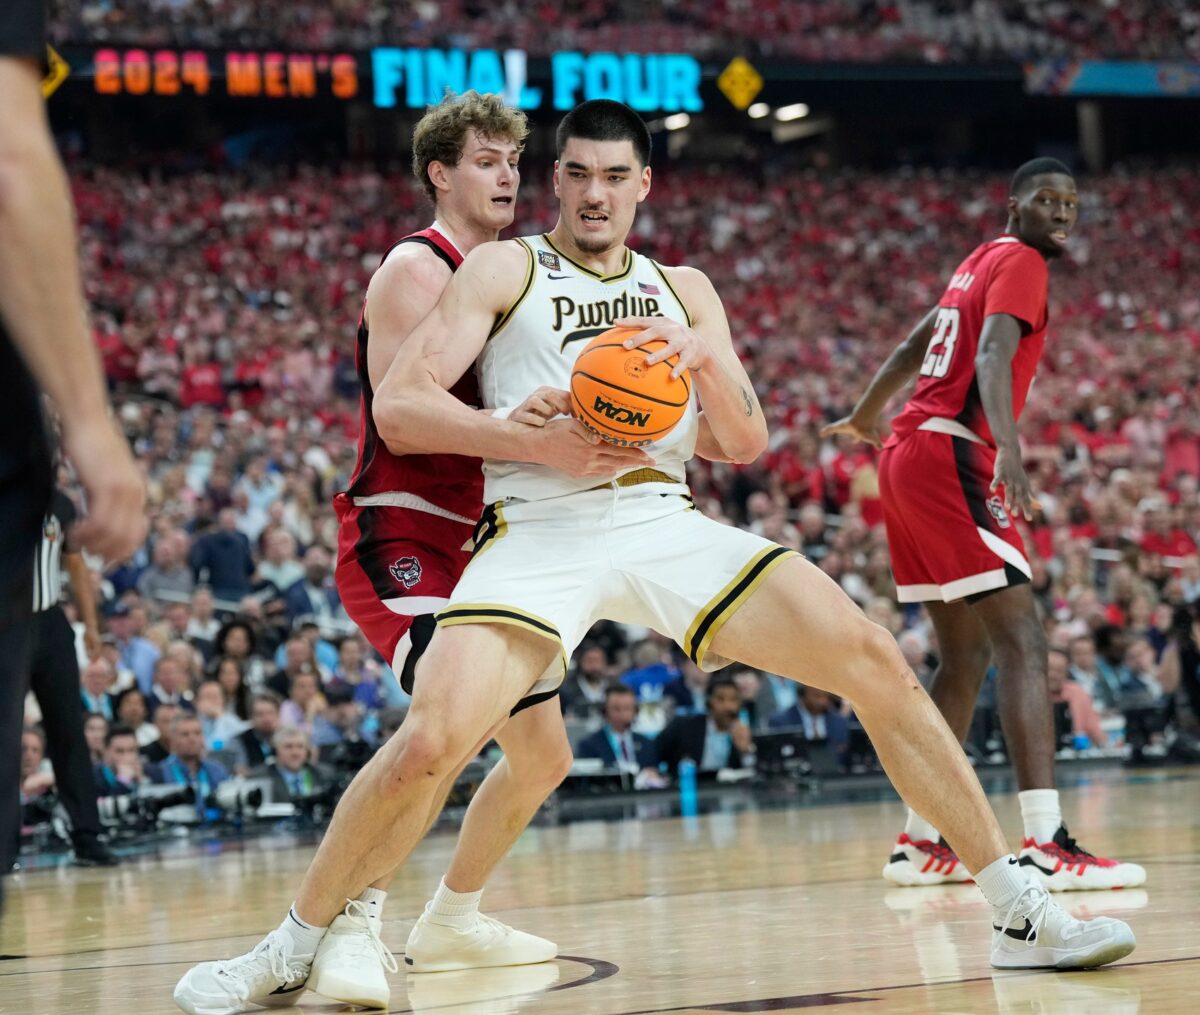 With the Big Ten on their backs, Purdue advances to NCAA Tournament’s championship game